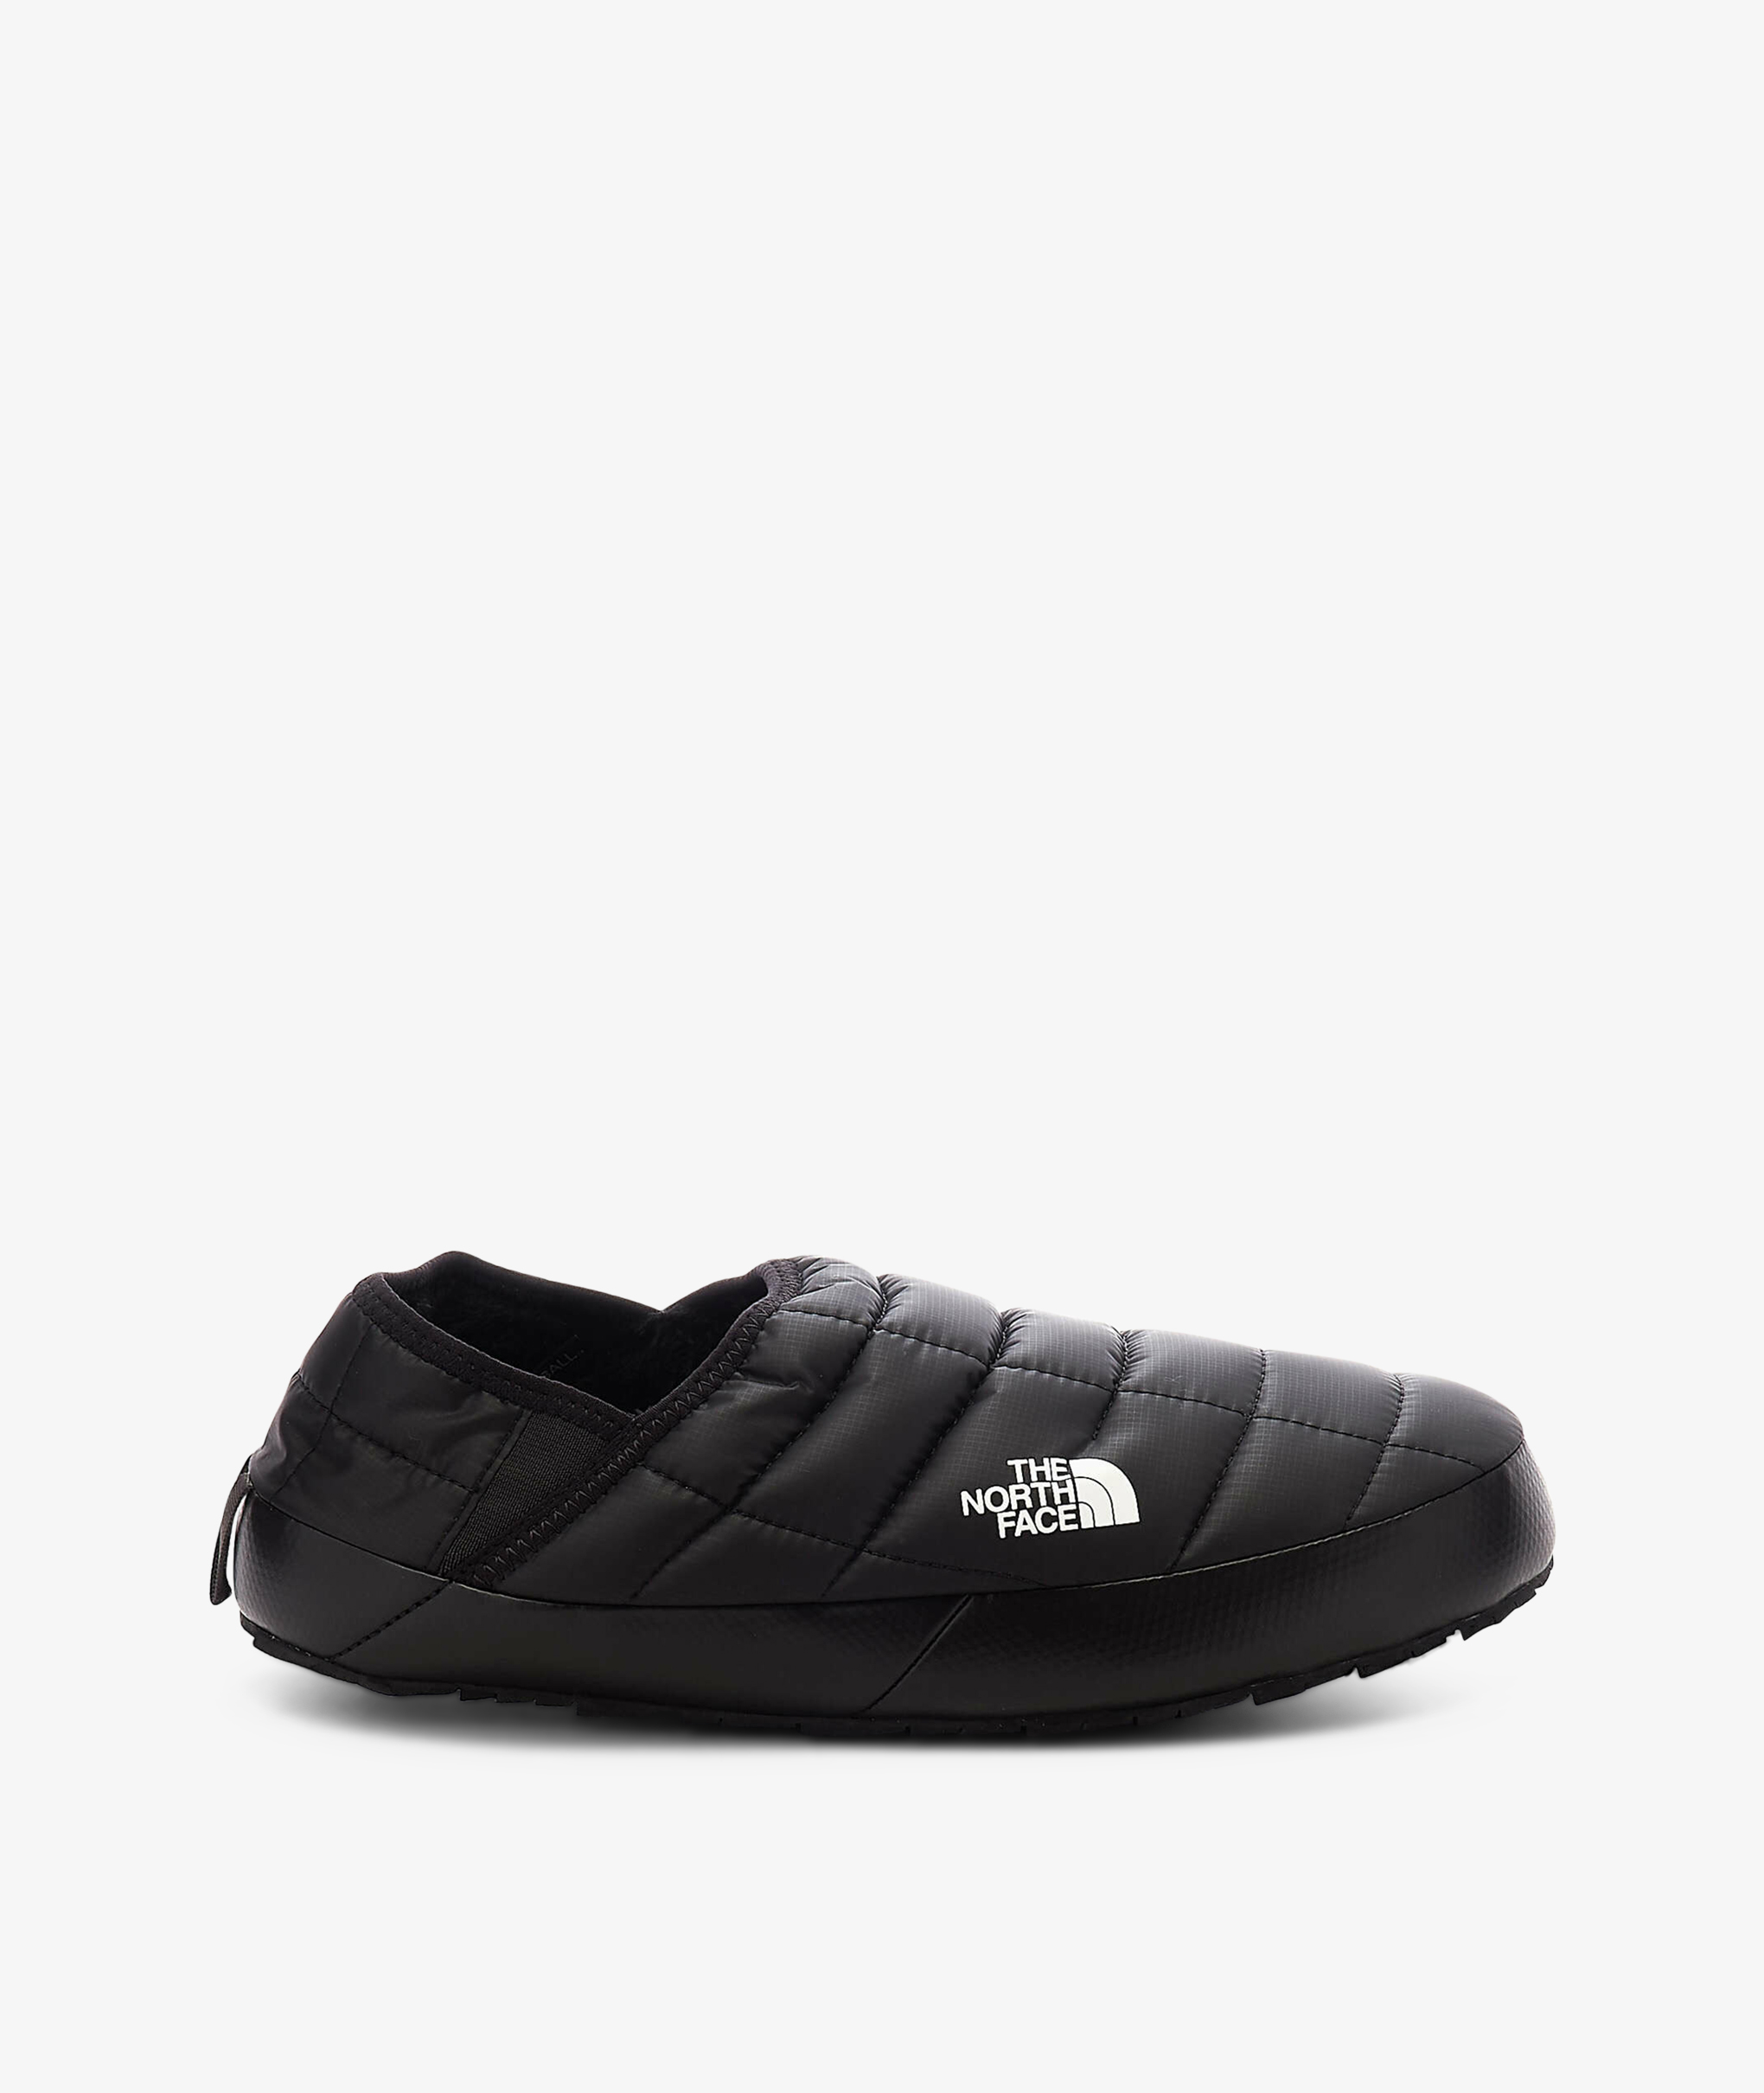 Kontur rookie job Norse Store | Shipping Worldwide - The North Face TRCTN Mule - Black / White